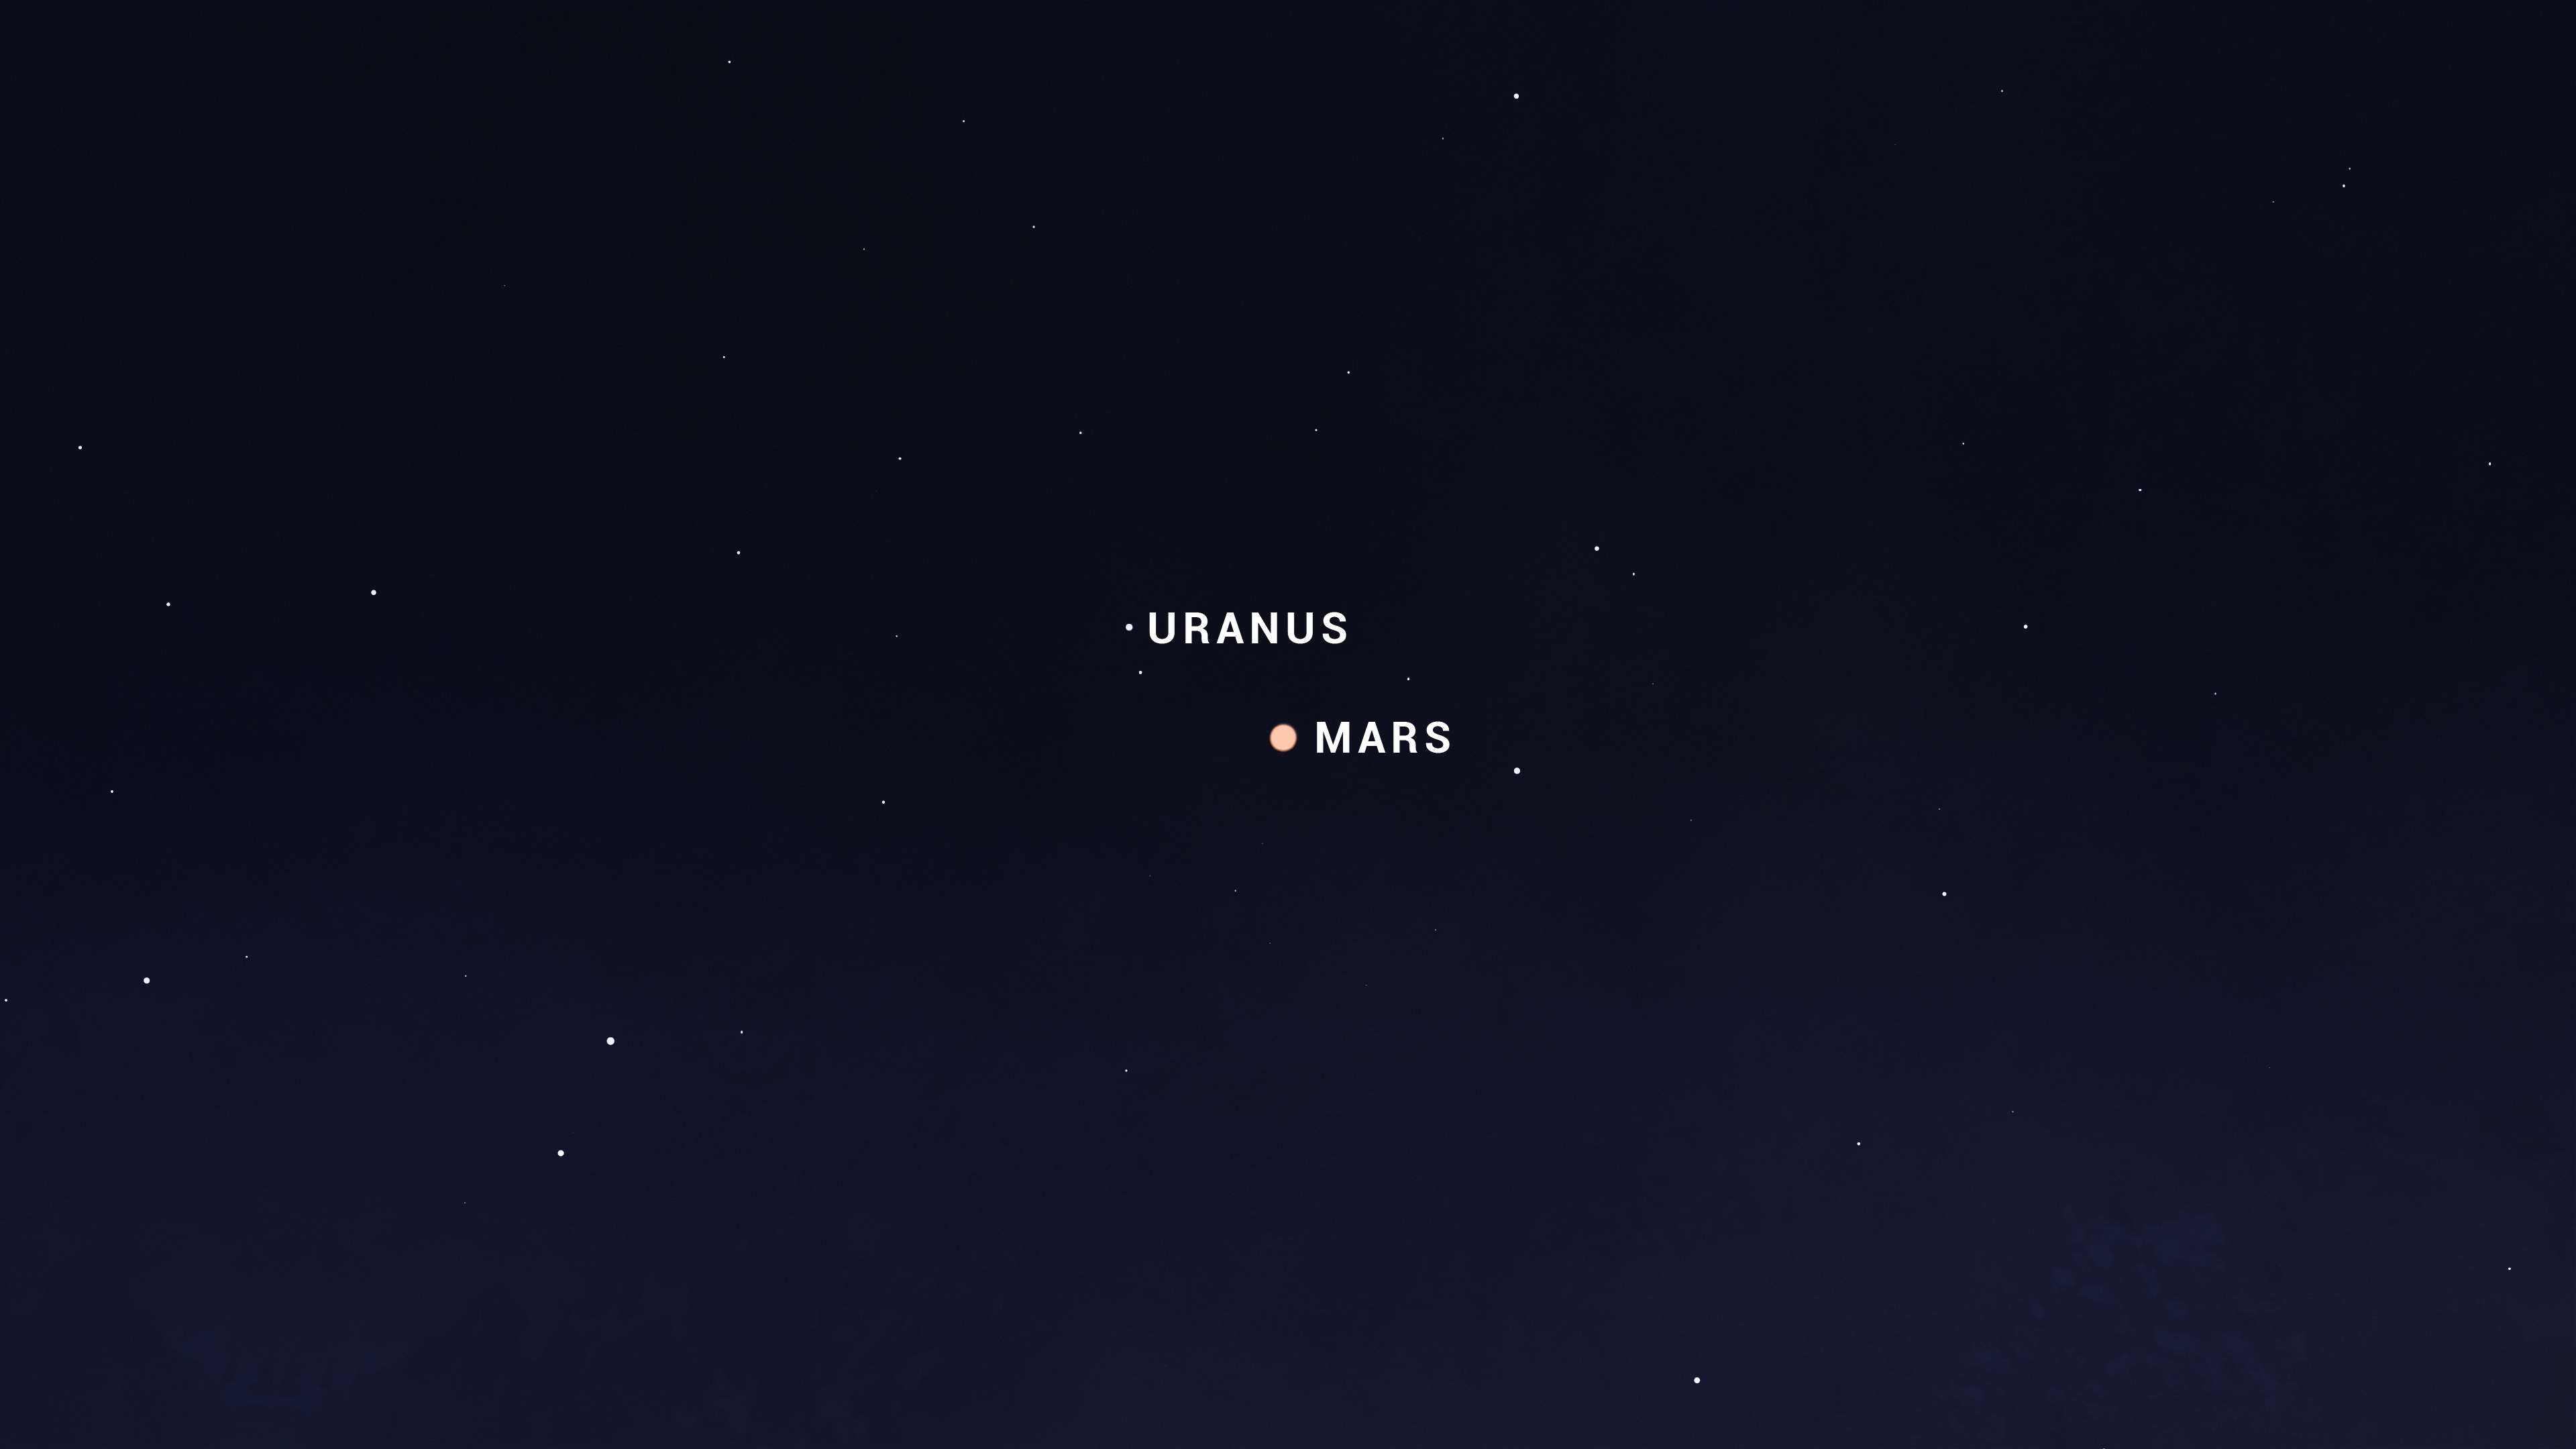 An illustrated sky chart shows a zoomed-in view, like what binoculars would reveal. The planets Mars and Uranus are pictured as small white dots among a handful of stars, with Uranus located at the 10 o'clock position above Mars. Mars is a reddish-colored dot that appears larger than Uranus, due to the former's greater brightness.